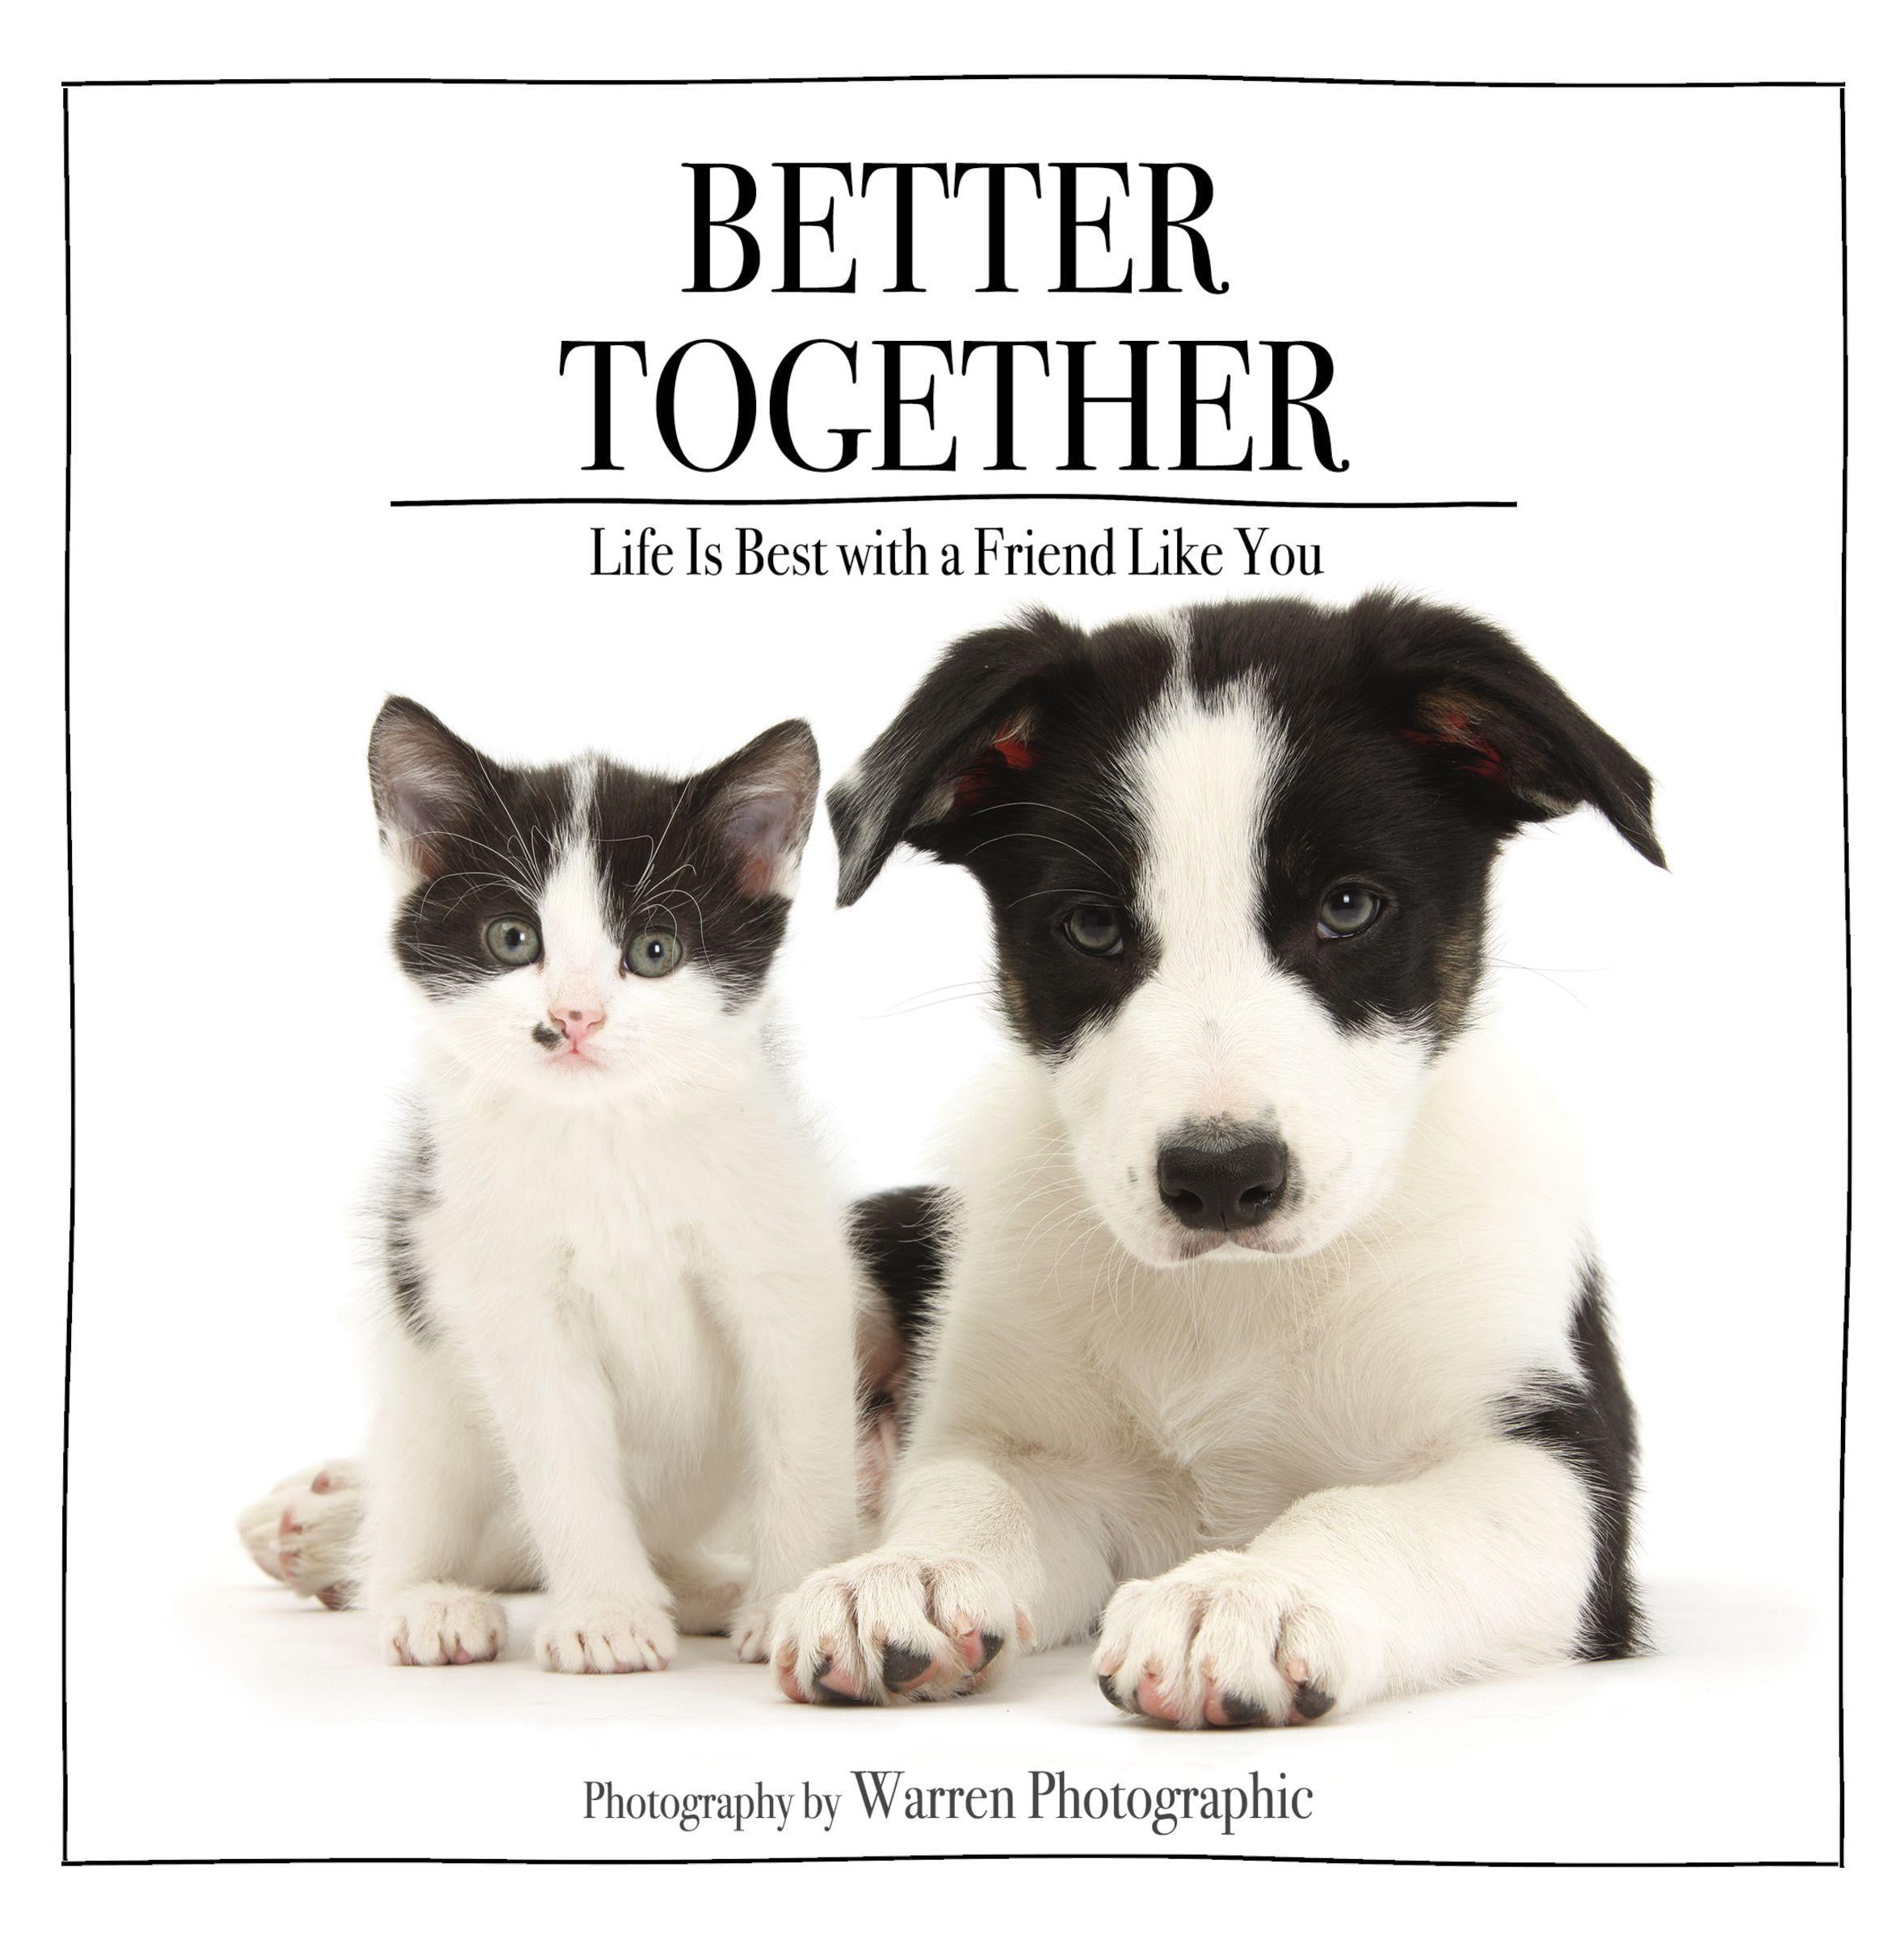 We could good together. A friend like you. Life is better with you. Better together. Better together перевод.